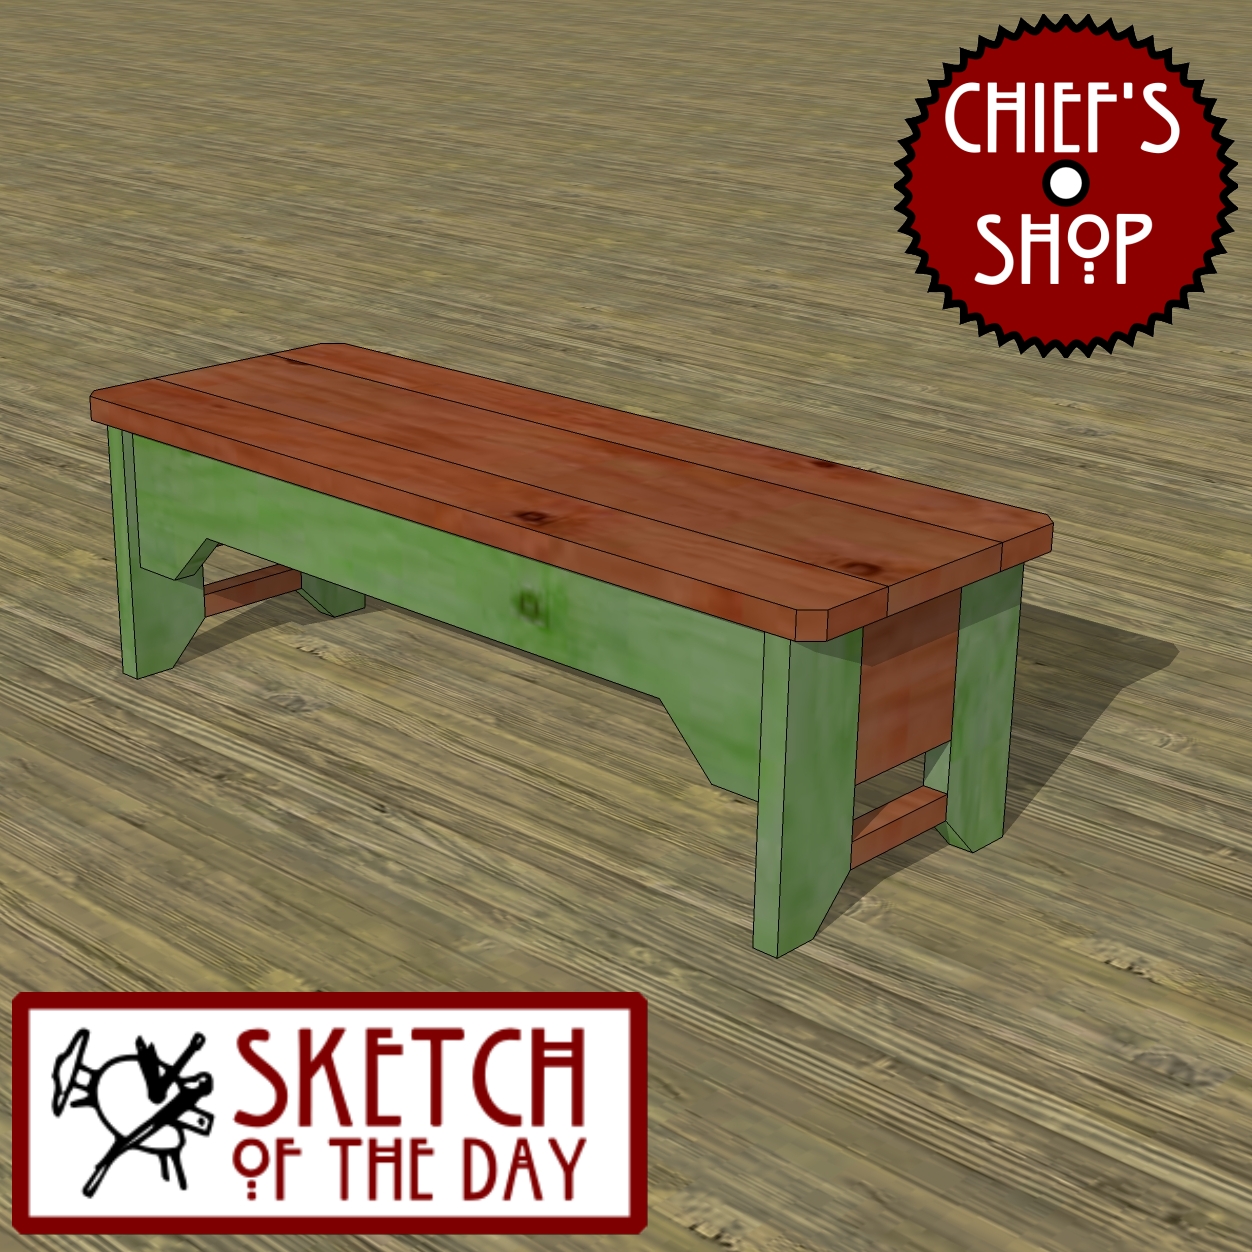 Sketch of the Day: Country Kitchen Bench #woodworking | Chief's Shop